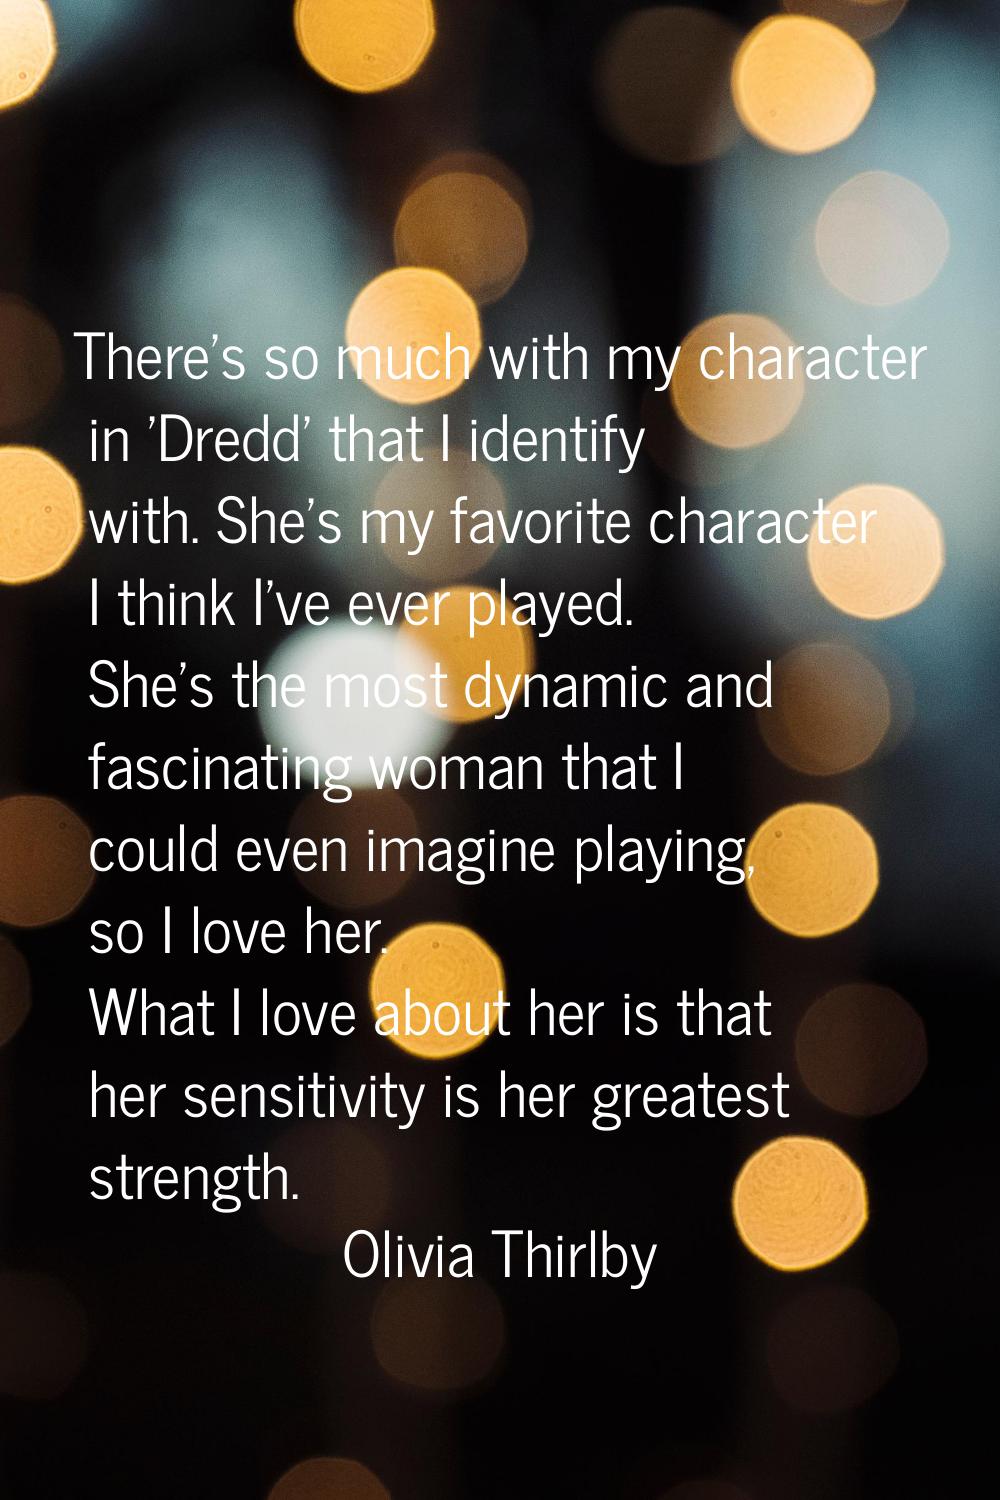 There's so much with my character in 'Dredd' that I identify with. She's my favorite character I th